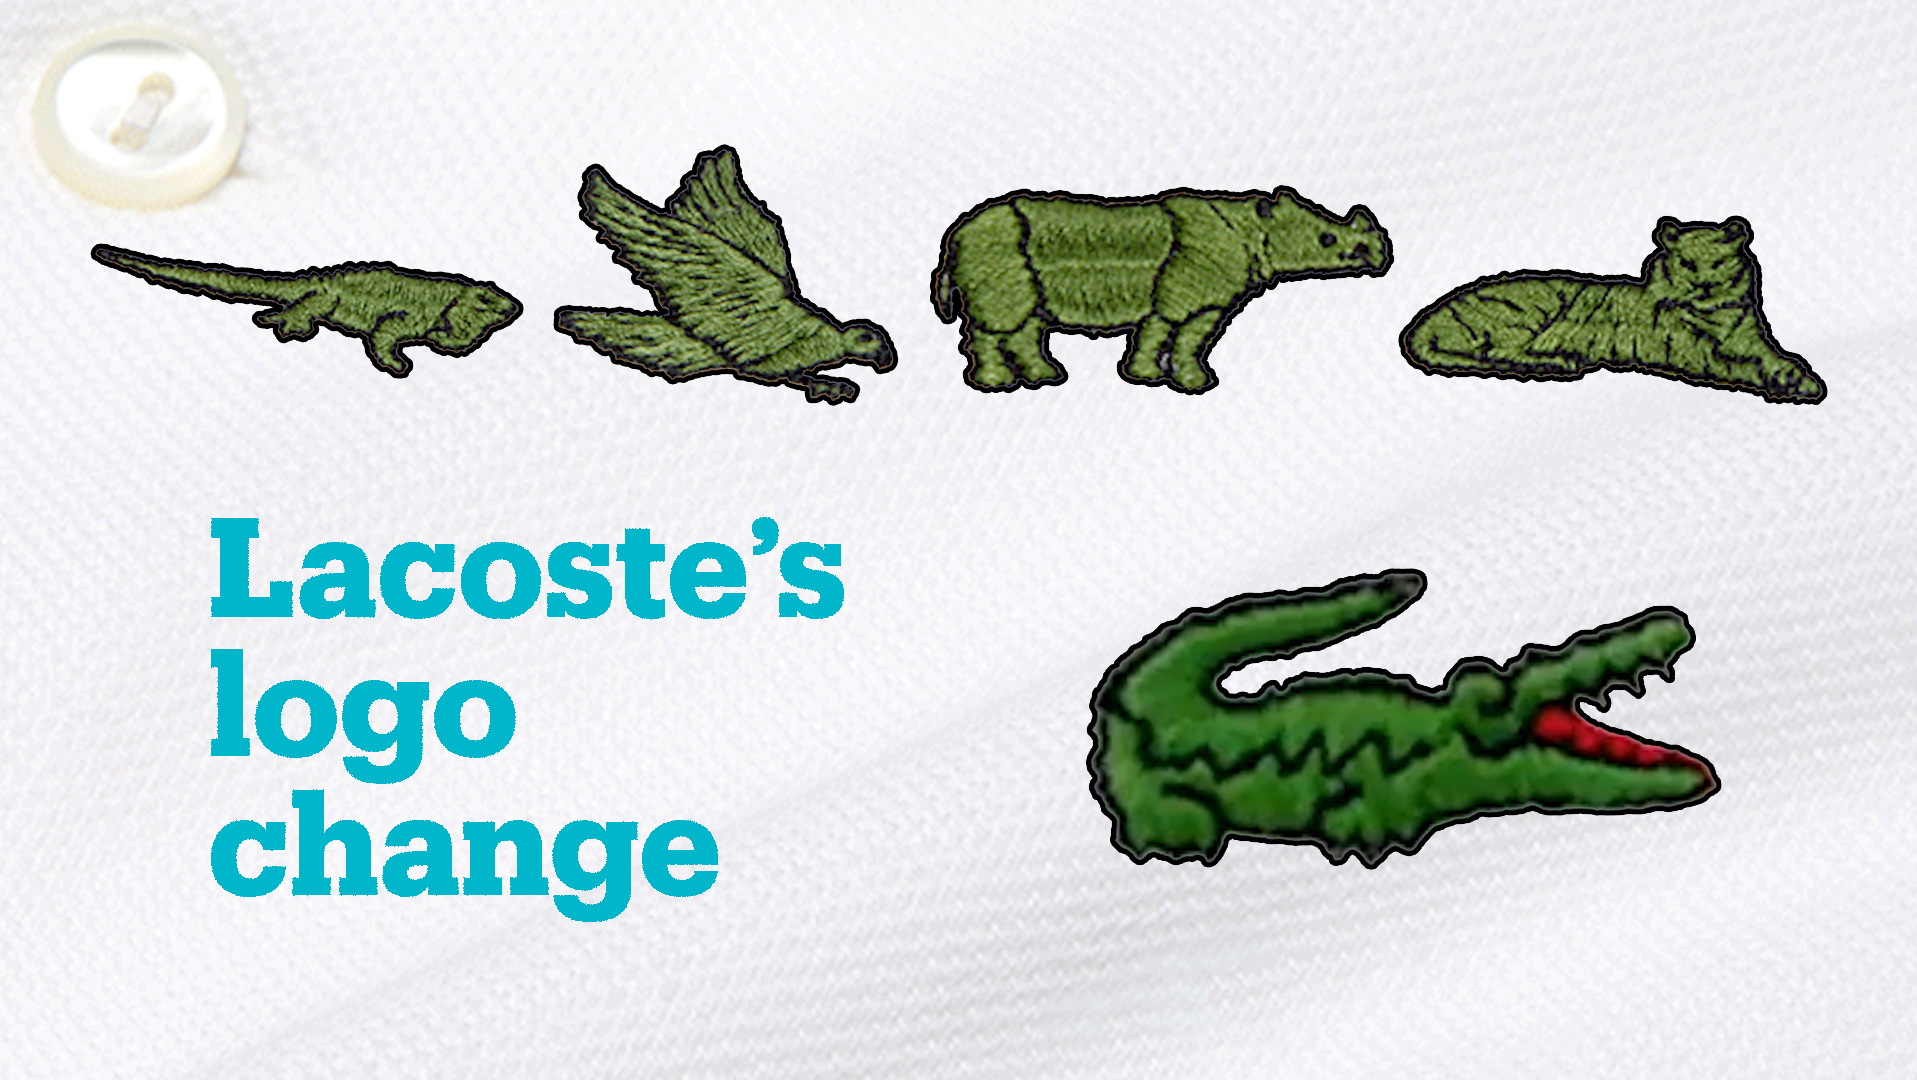 Lacoste is replacing endangered animals